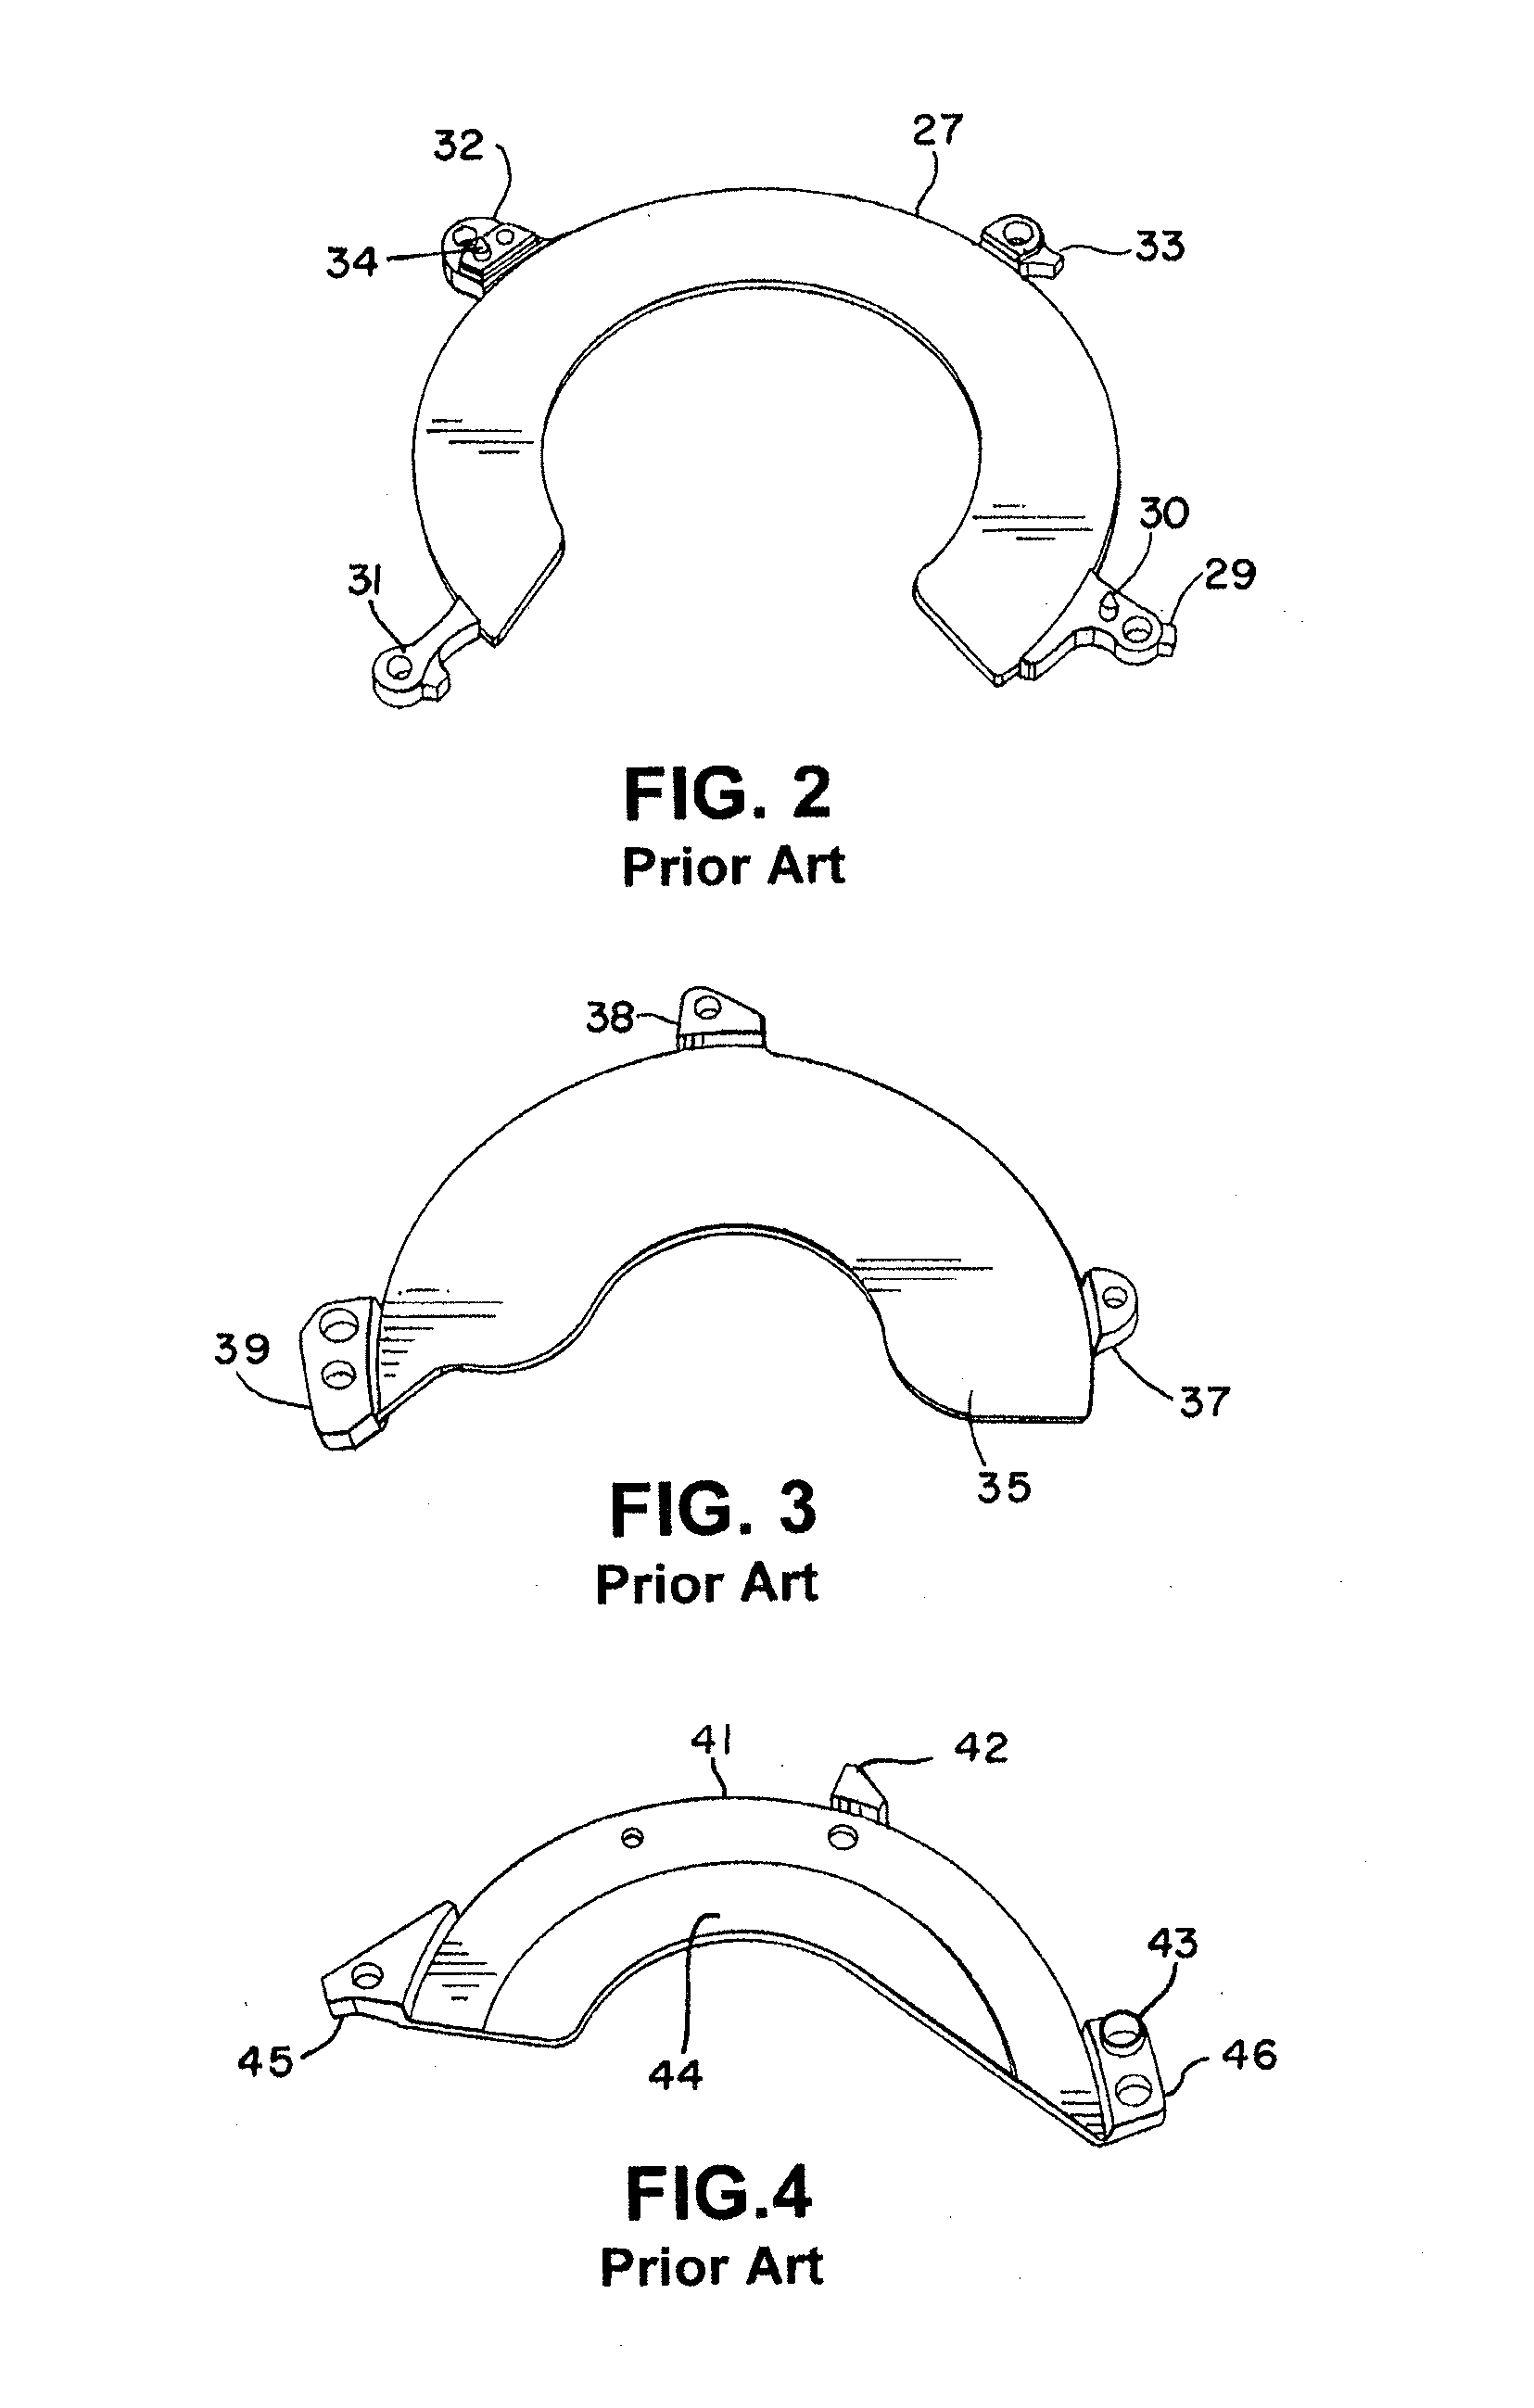 Disk separator plates and method of making disk separator plates for hard disk drives